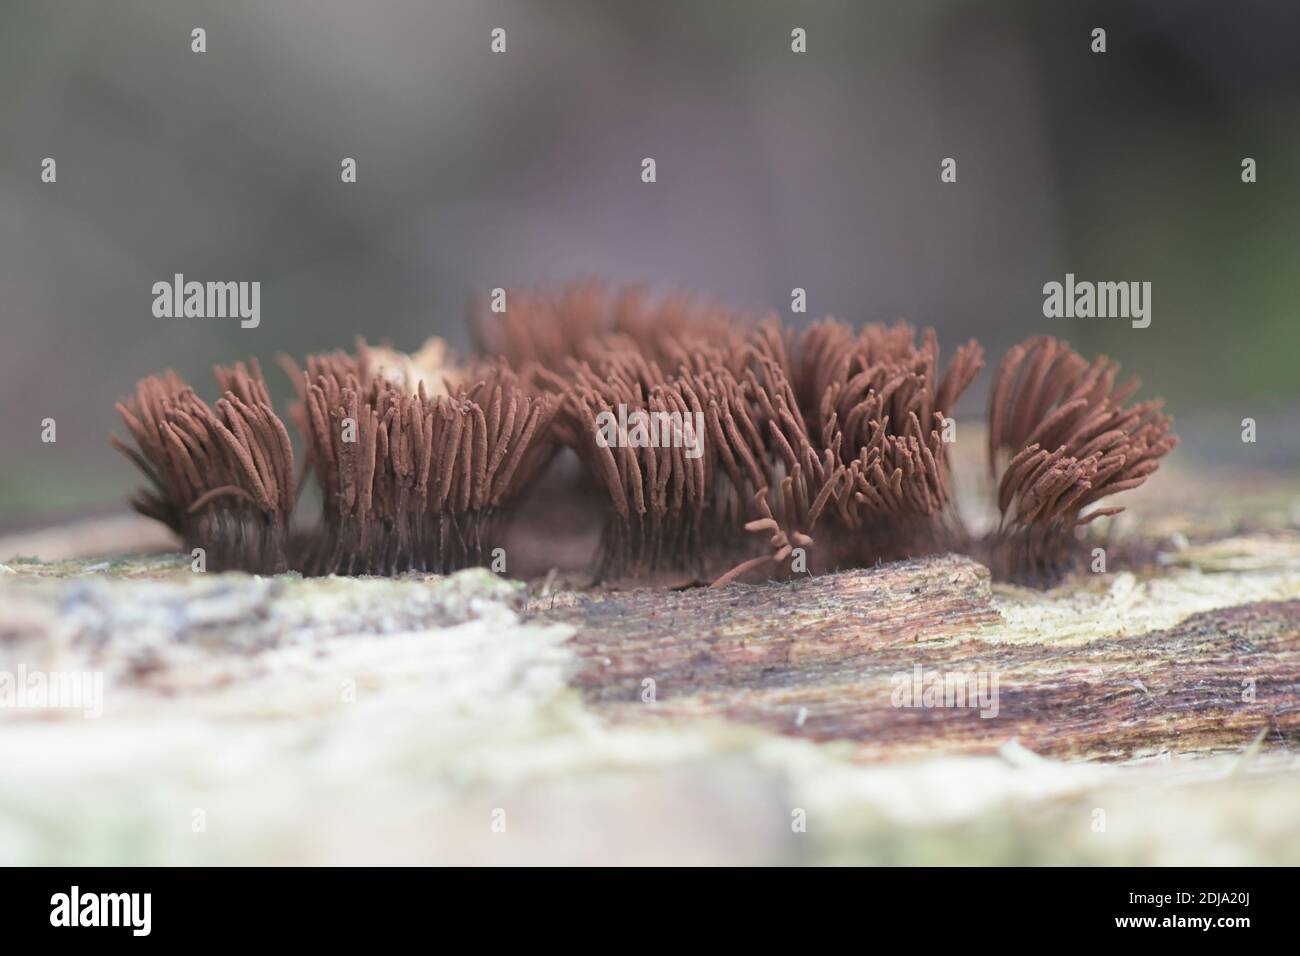 Stemonitis axifera, known as the chocolate tube slime mold or mould Stock Photo